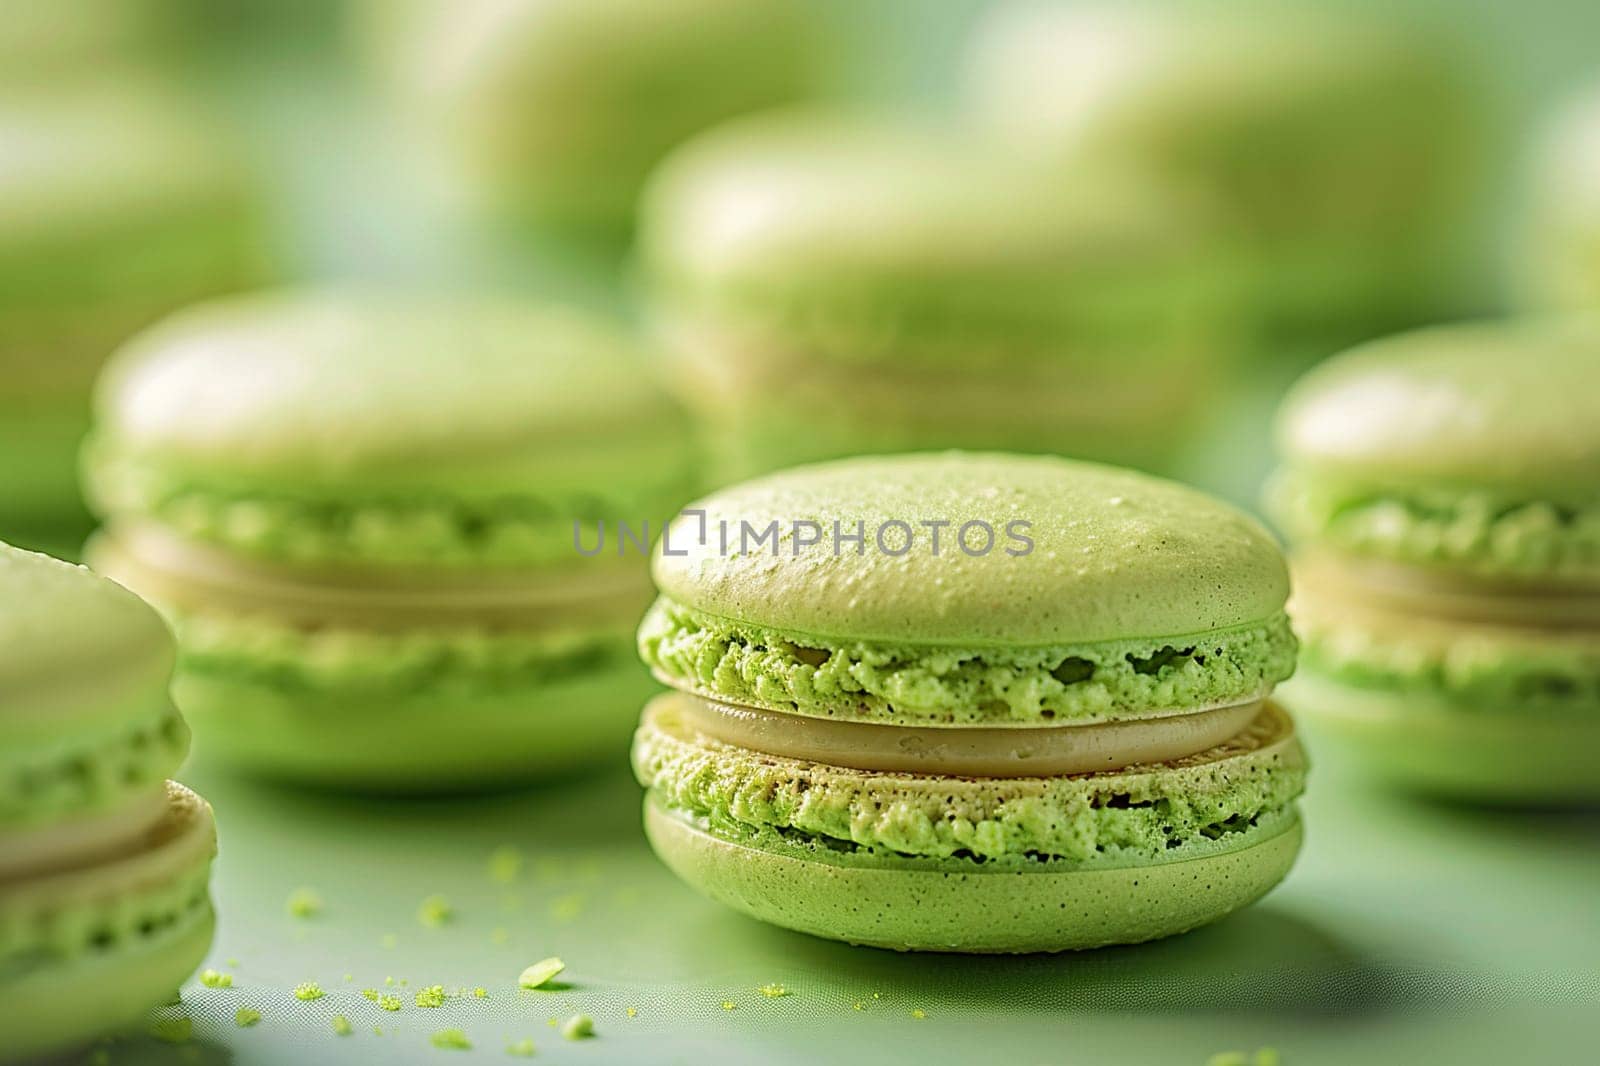 Homemade French macarons with mint crumble and pistachio filling.